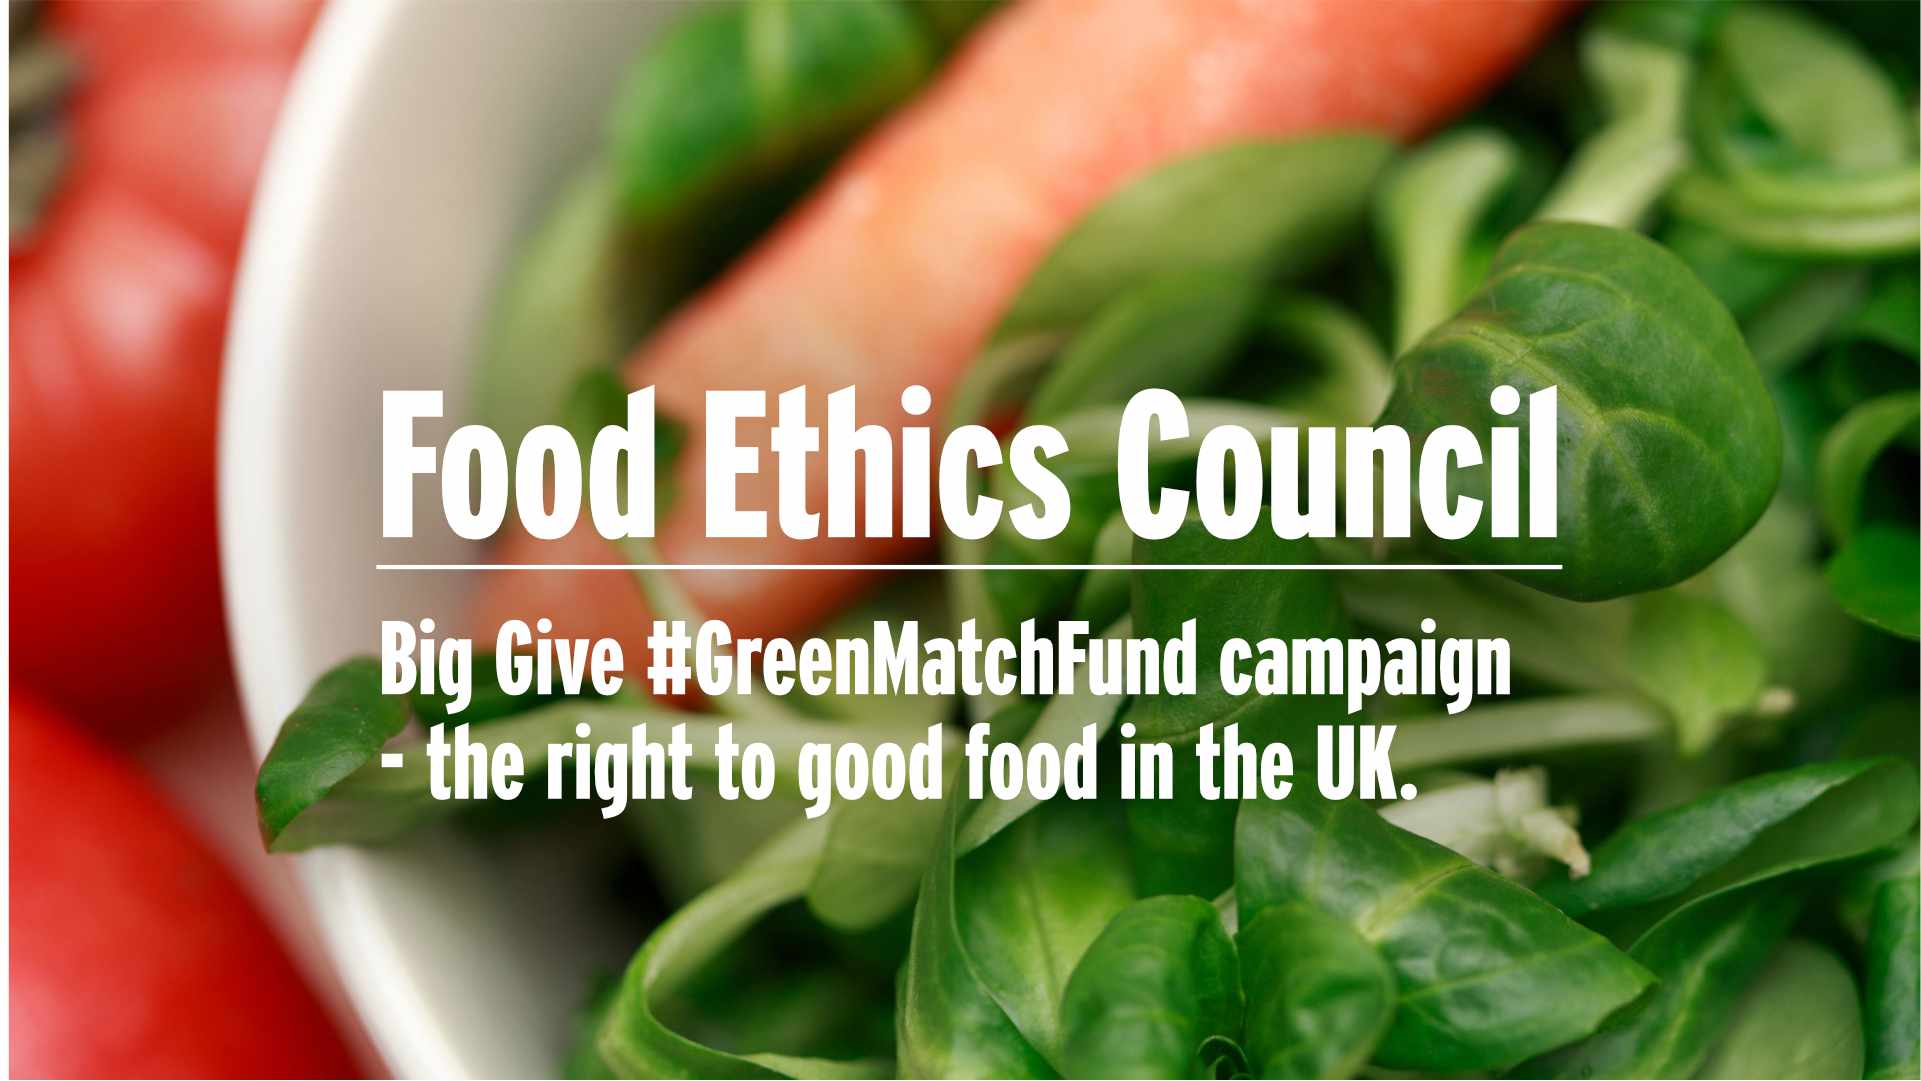 Big Give GreenMatchFund Campain – The Food Ethics Council